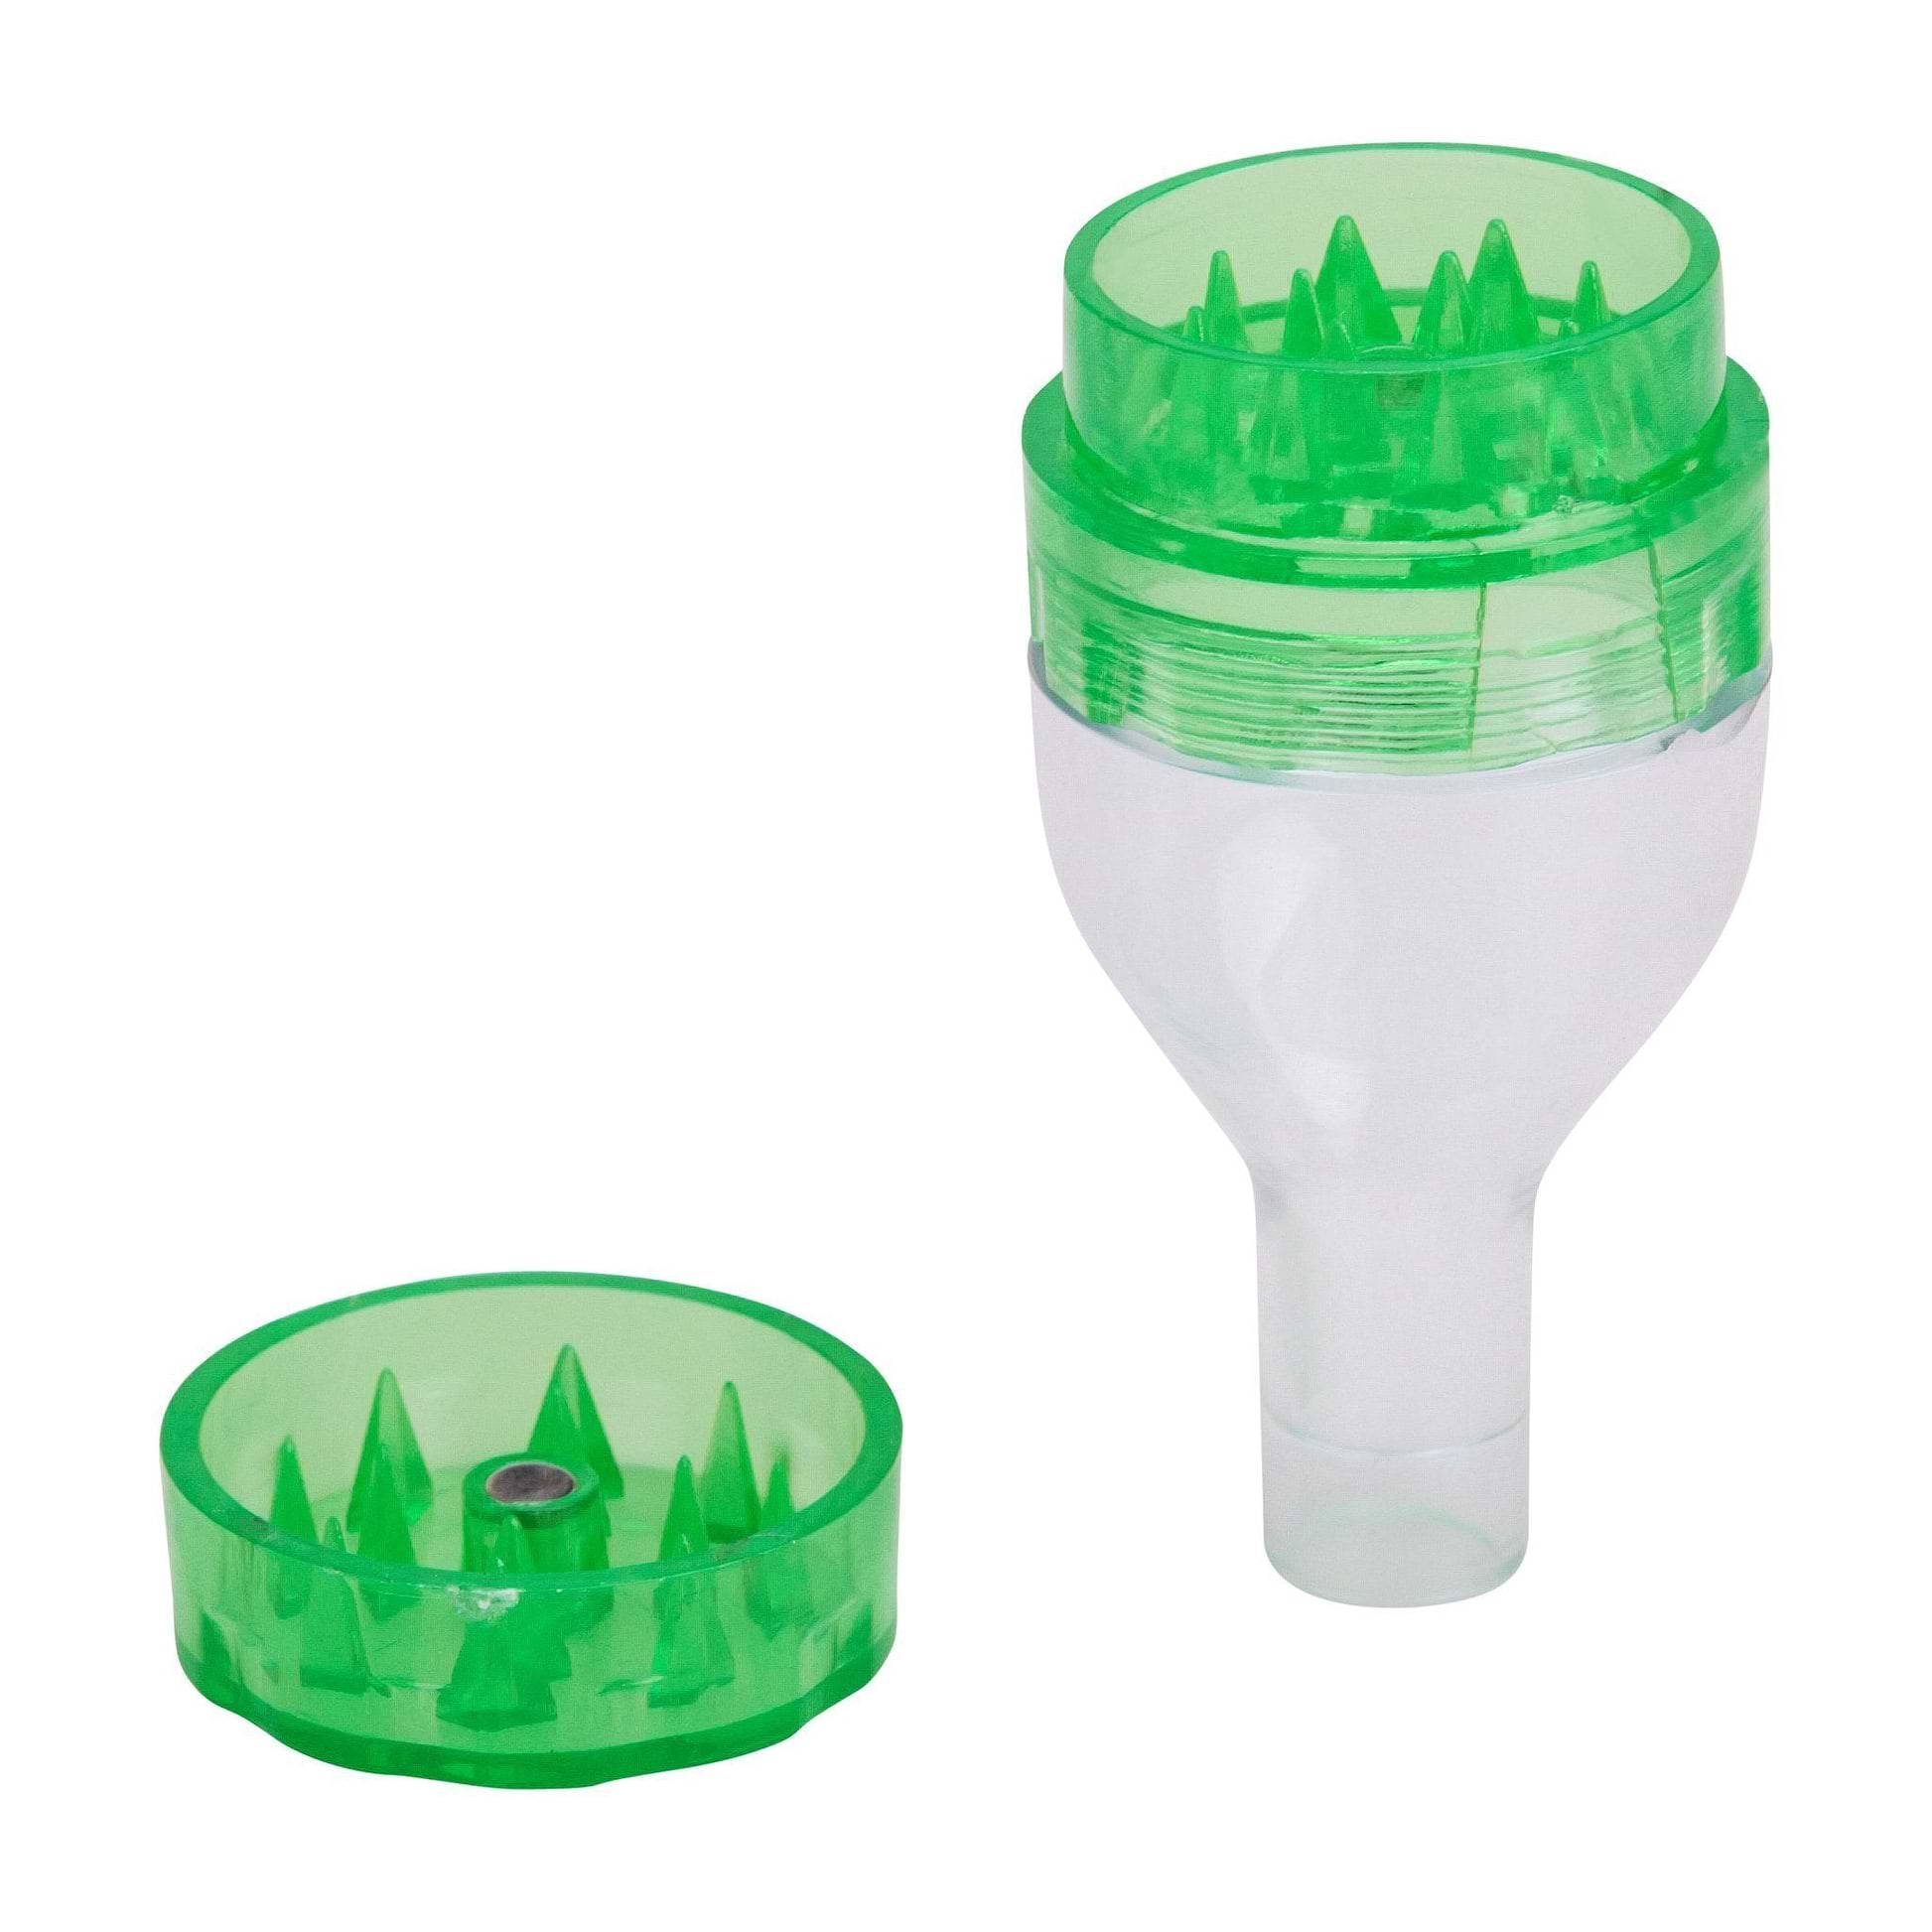 Pocket-friendly tobacco herb grinder for cone rolling made with lightweight plastic in a refreshing look and clean style